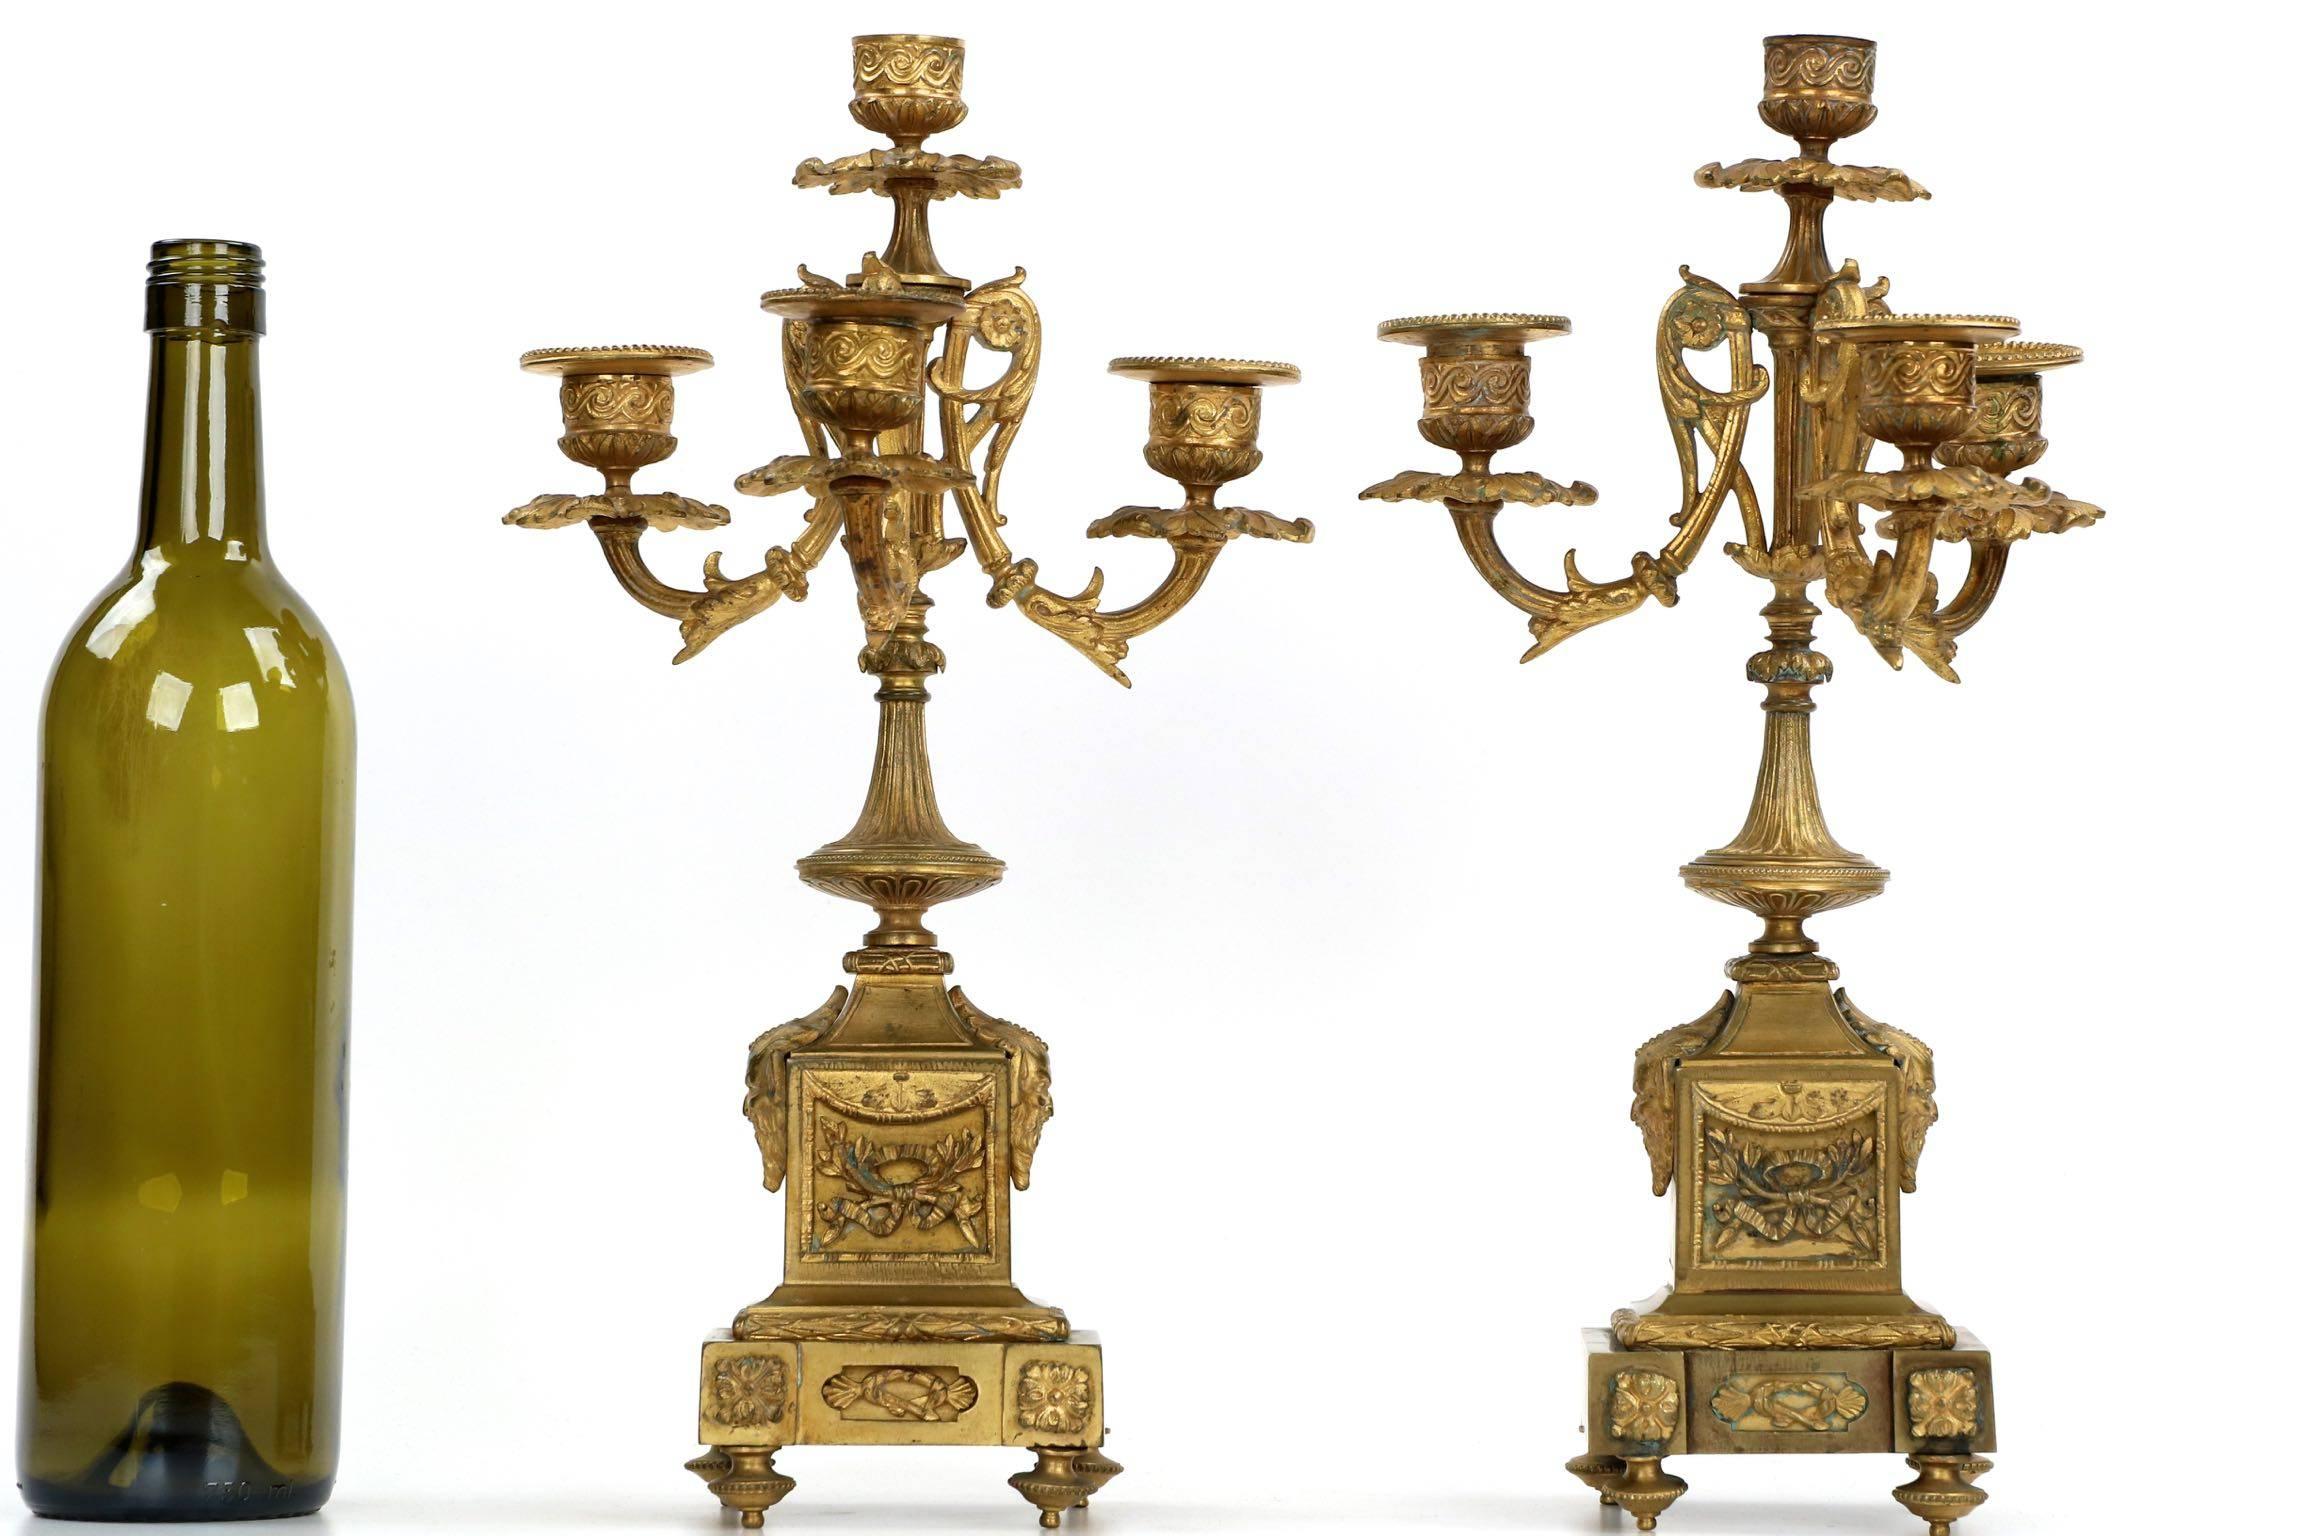 This petite pair of four-light candelabra are a most handsome and finely cast lighting element from the fourth quarter of the 19th century. Each is stamped verso “H. Picard” for Henri Picard, an important and highly regarded bronzier active in